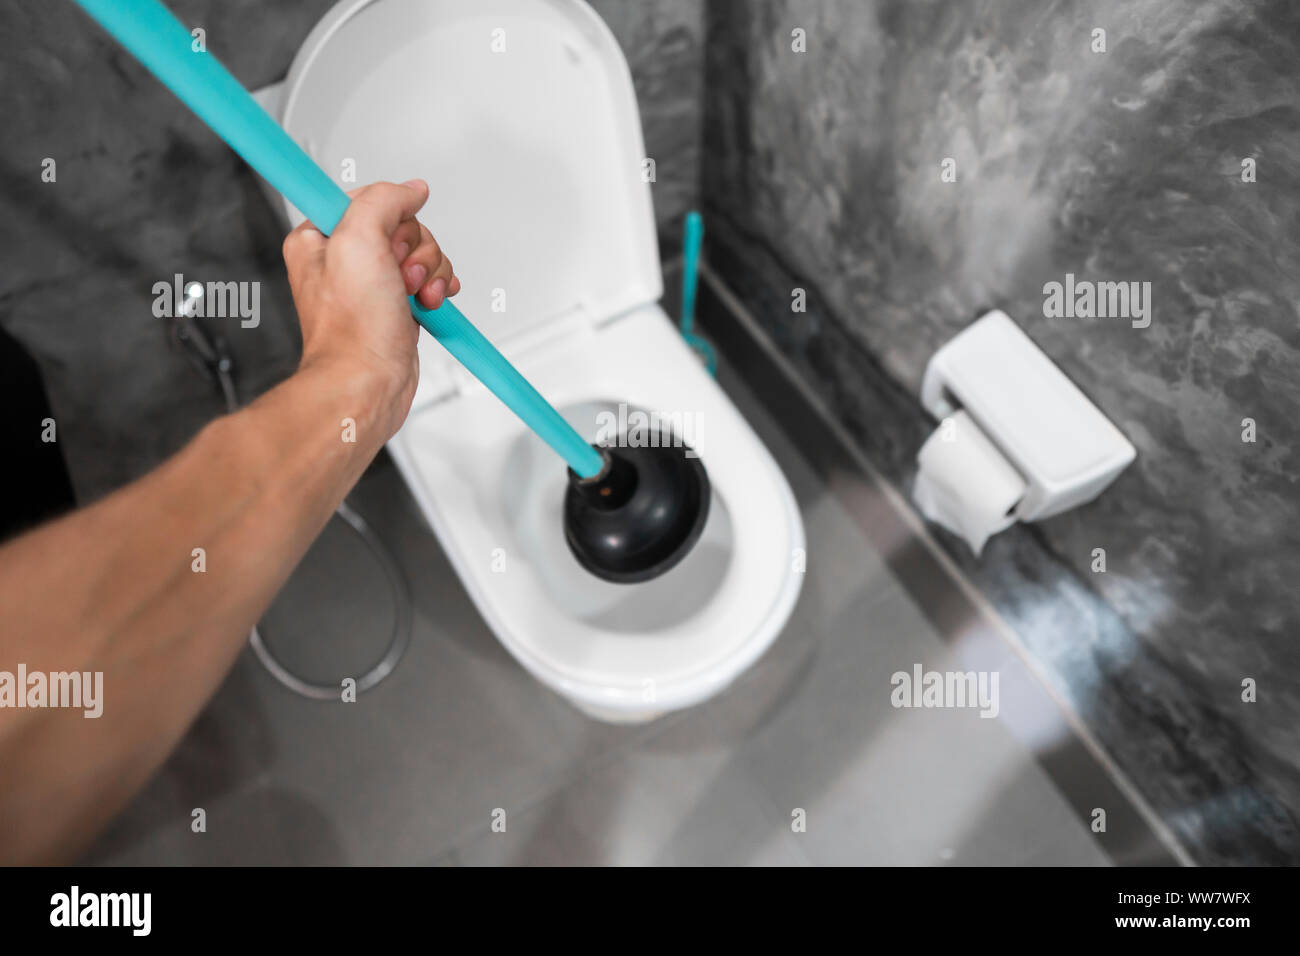 Toilet repair by hand with a Toilet Plunger. Plumbing. A plumber uses a plunger to unclog a toilet. Toilet Plunger. Stock Photo